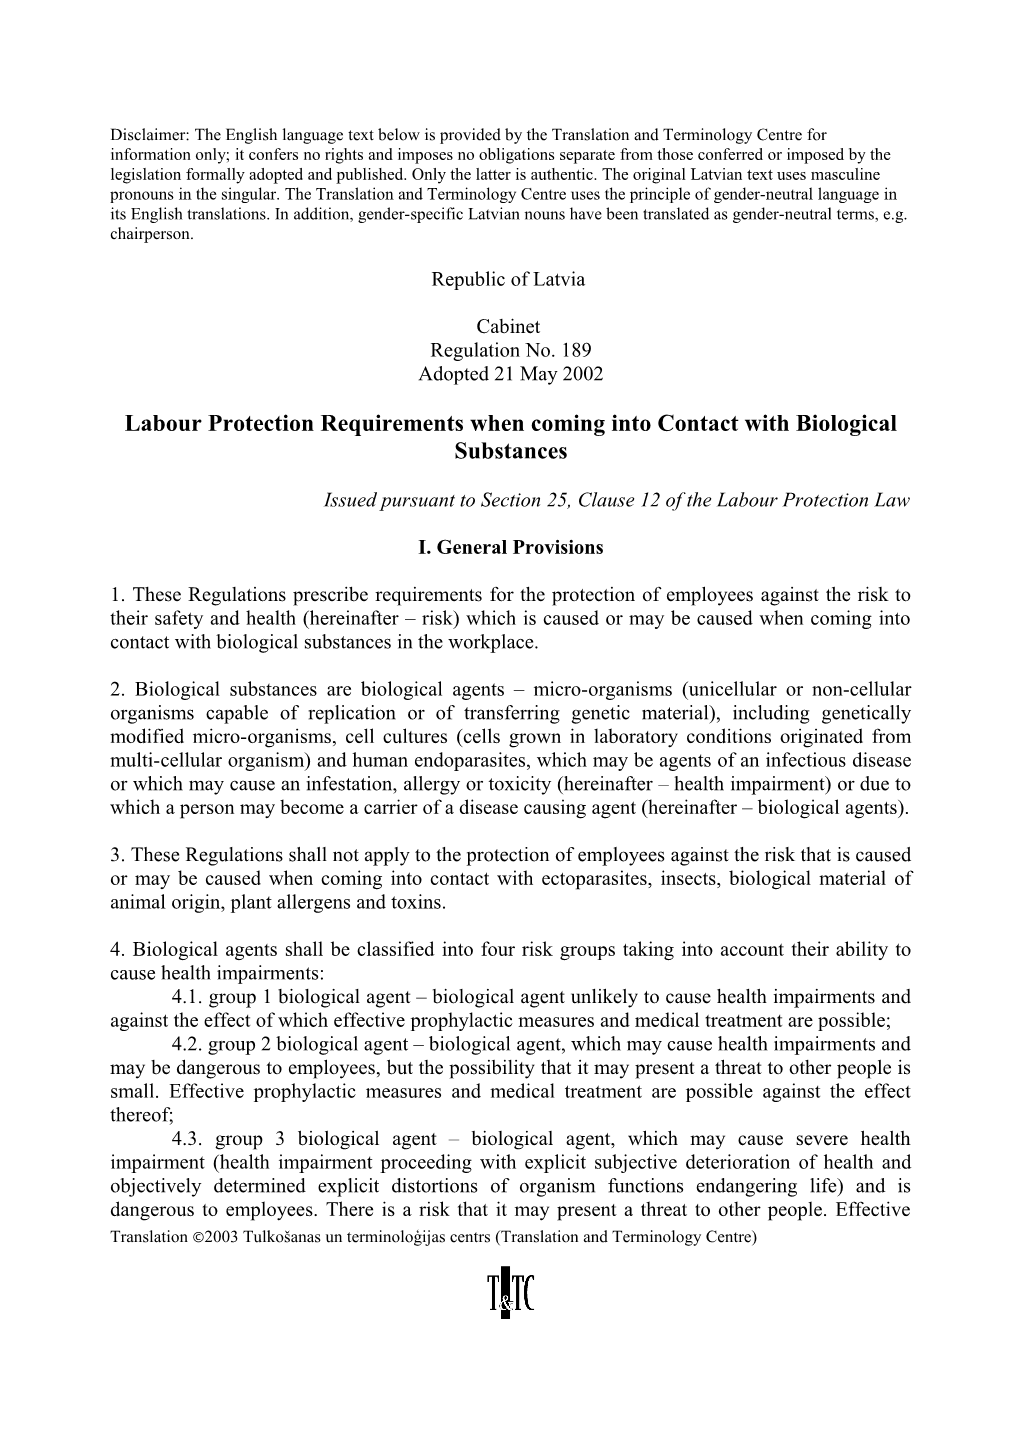 Labour Protection Requirements When Coming Into Contact with Biological Substances